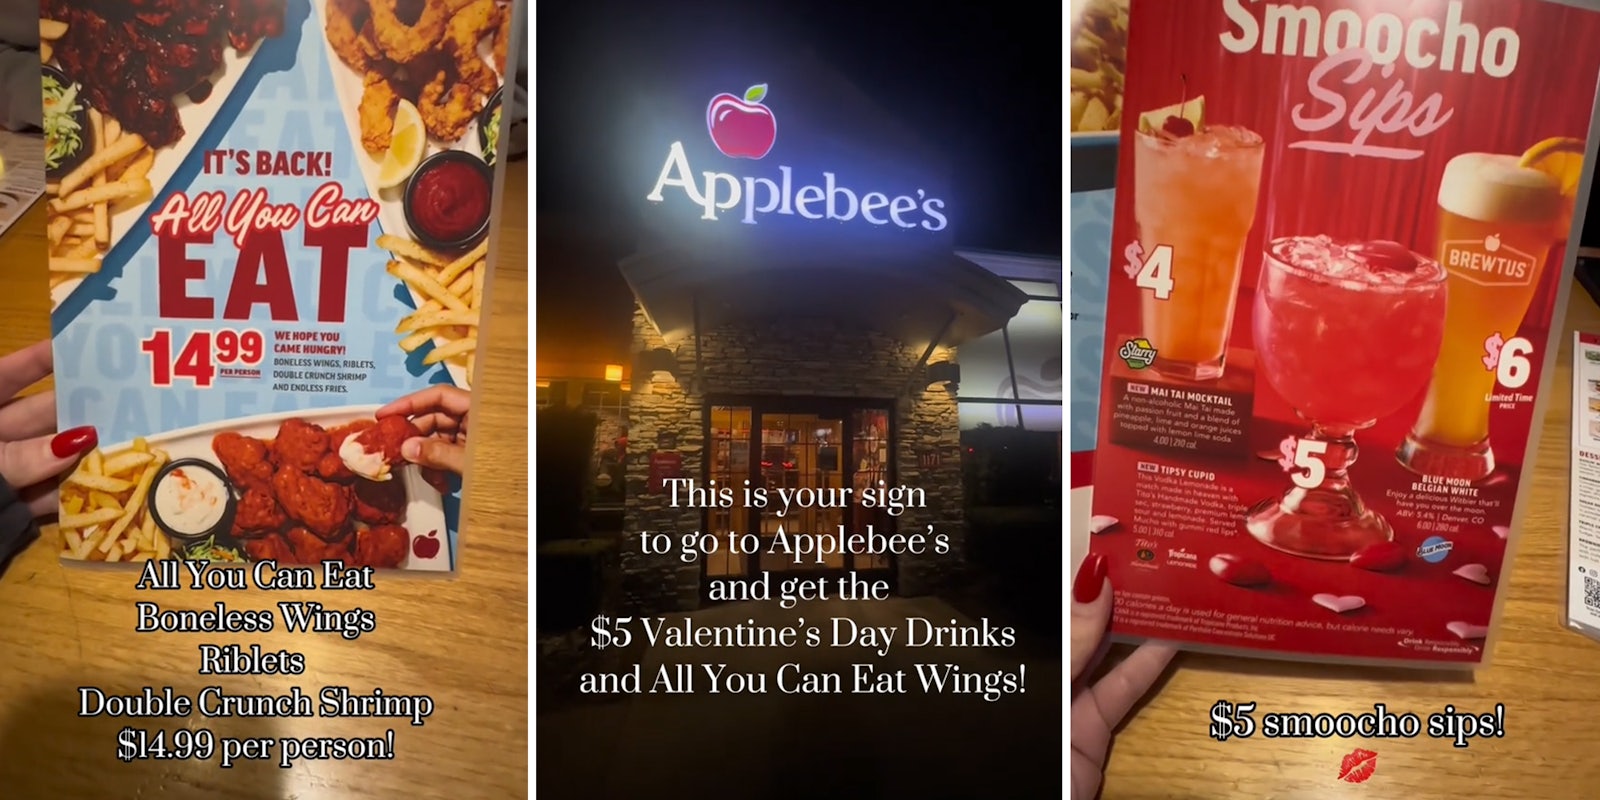 Applebee’s $5 Valentine’s Day deal has customers who aren’t in a relationship together ordering